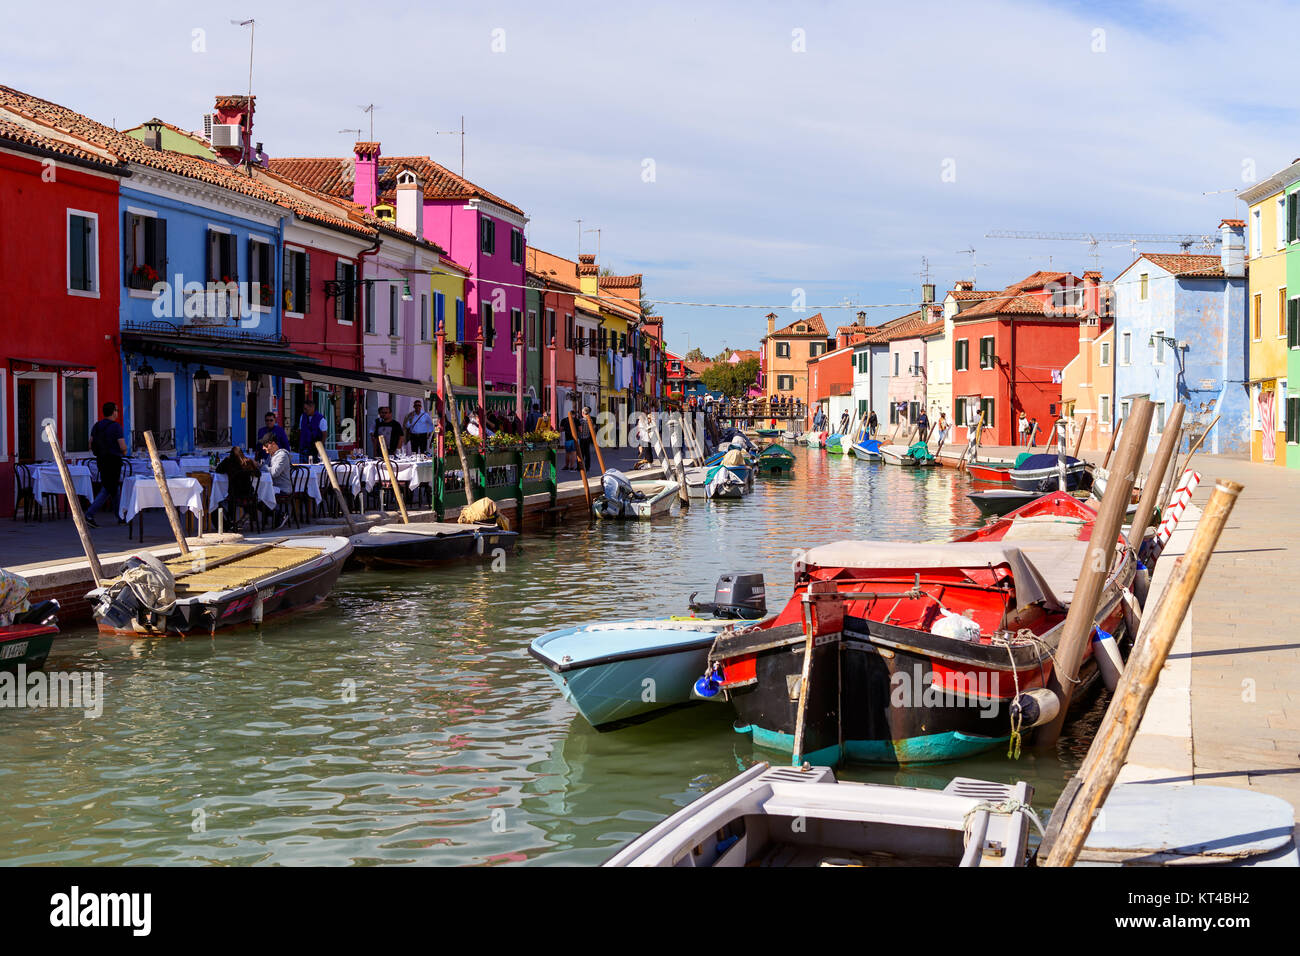 Tourists and colorful houses along the canal on the Venetian island of Burano, Venice lagoon, Burano, Italy Stock Photo